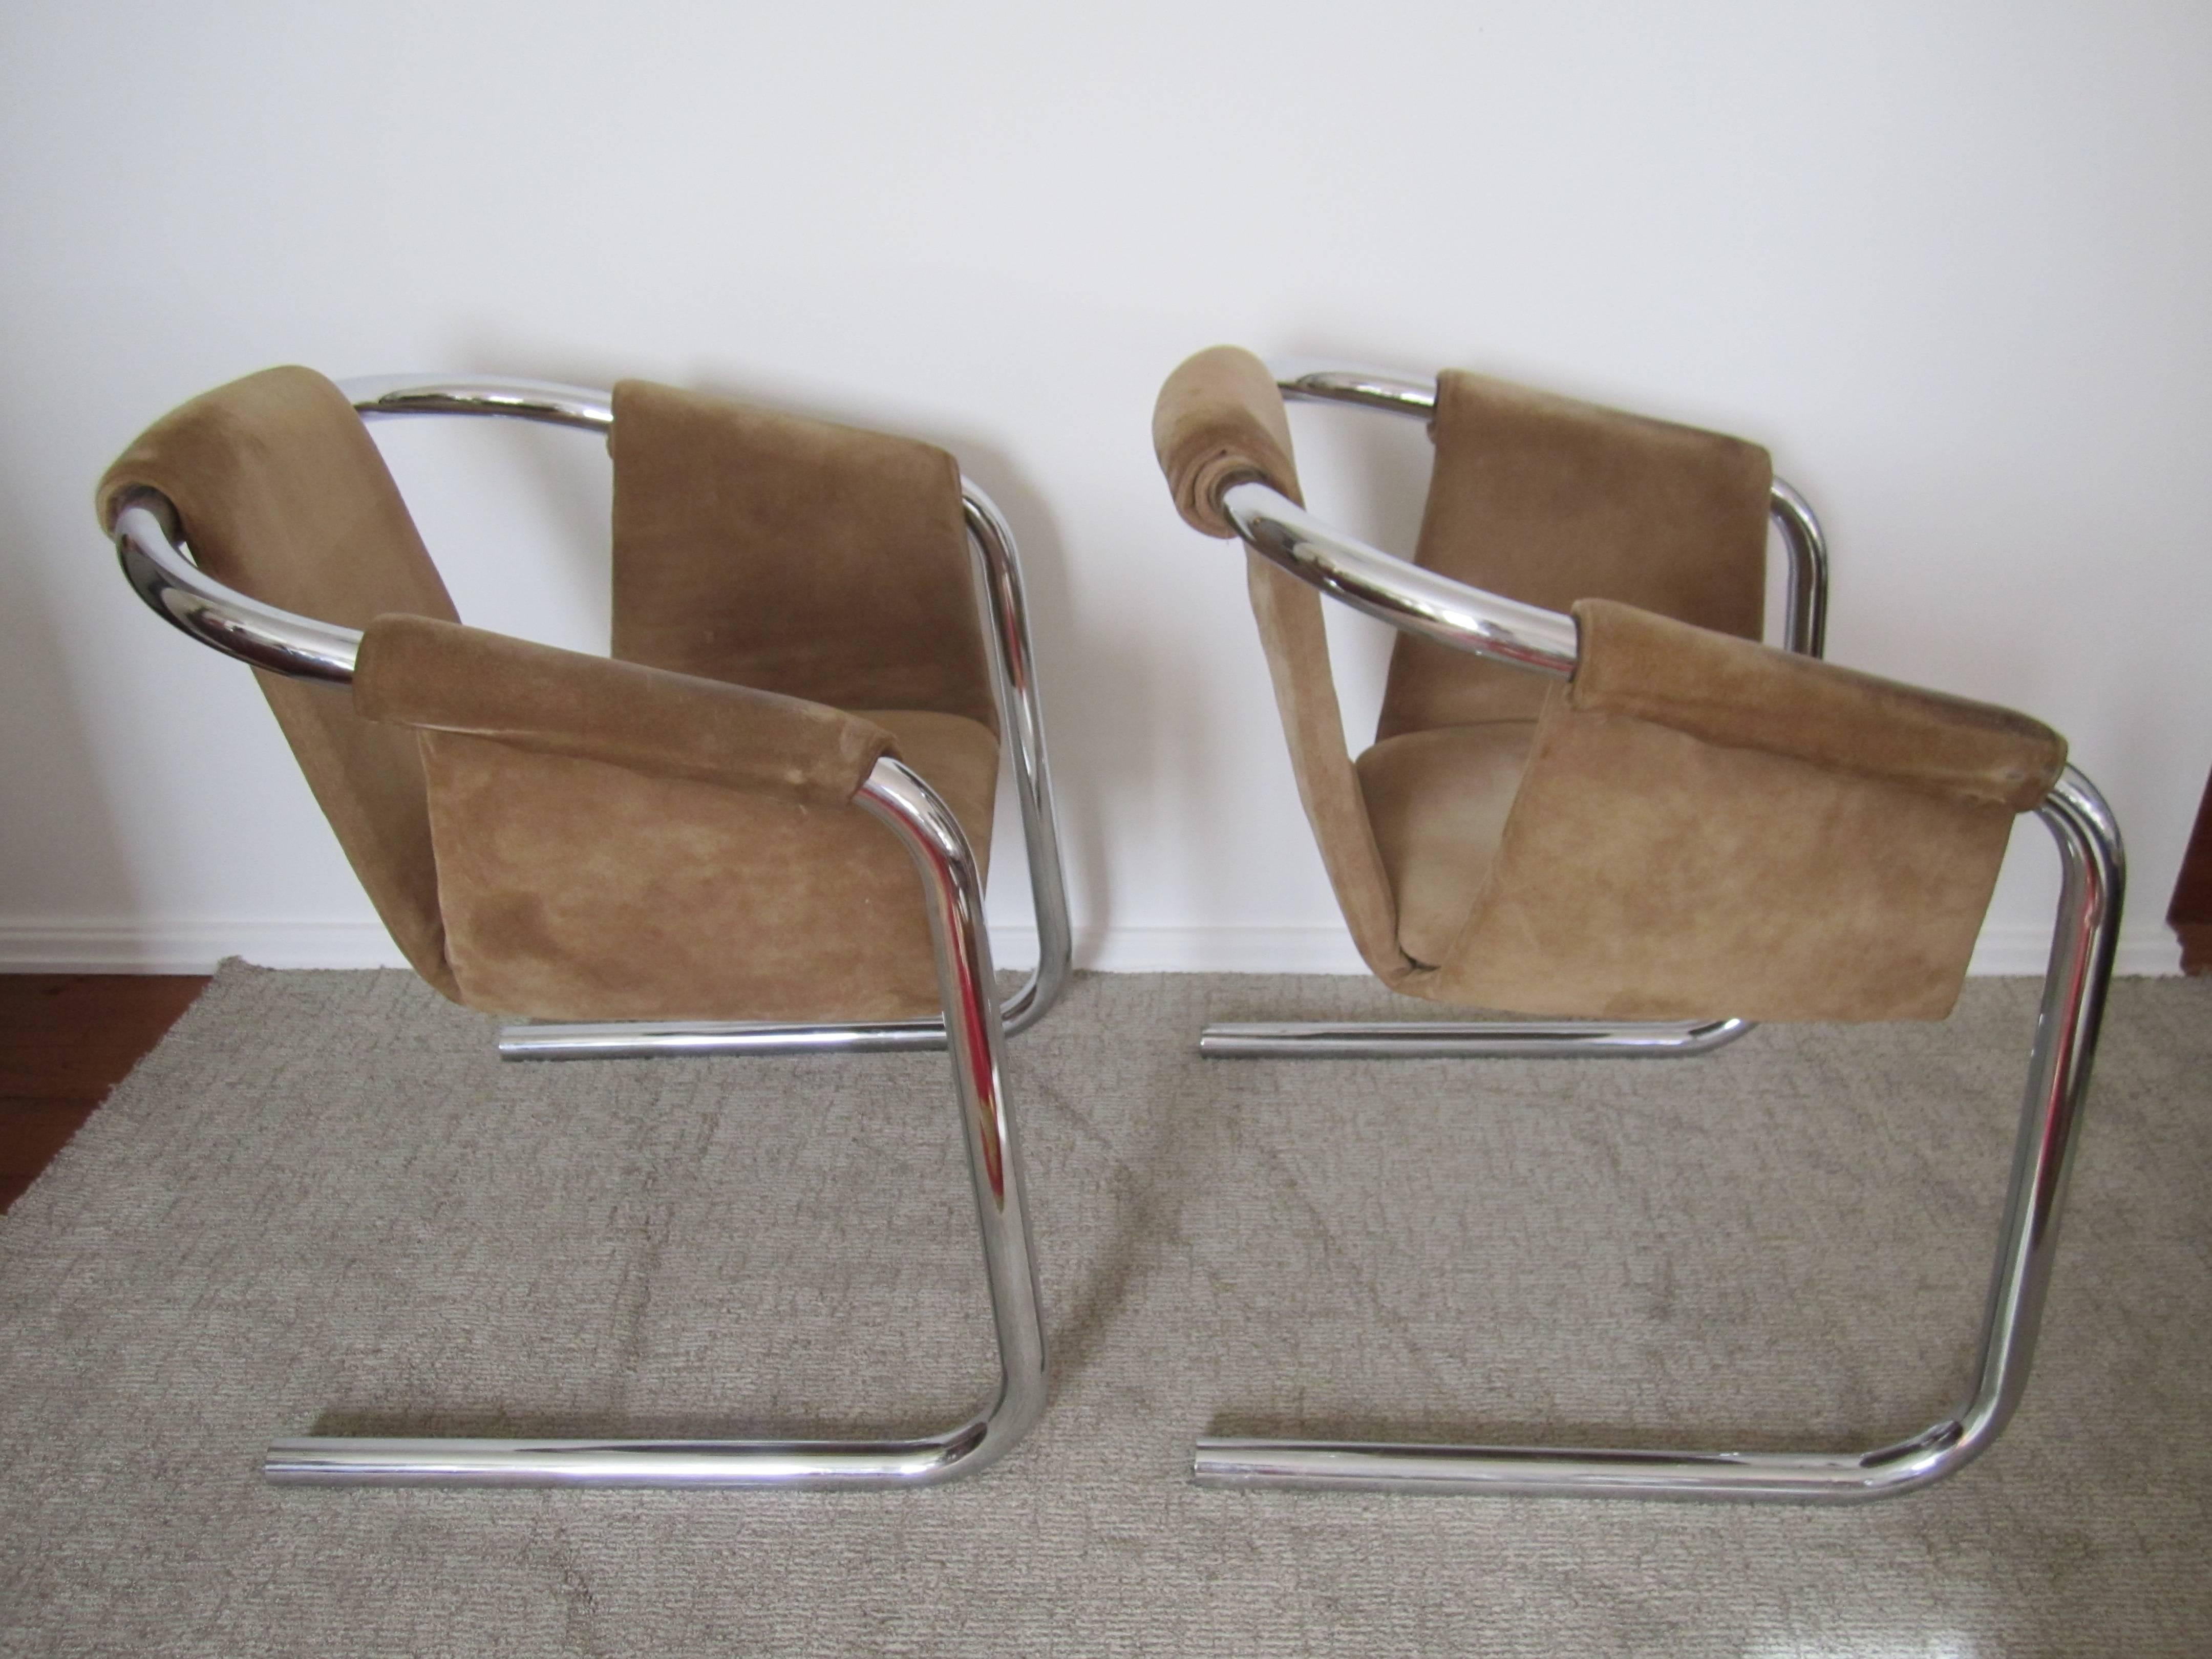 80s chairs